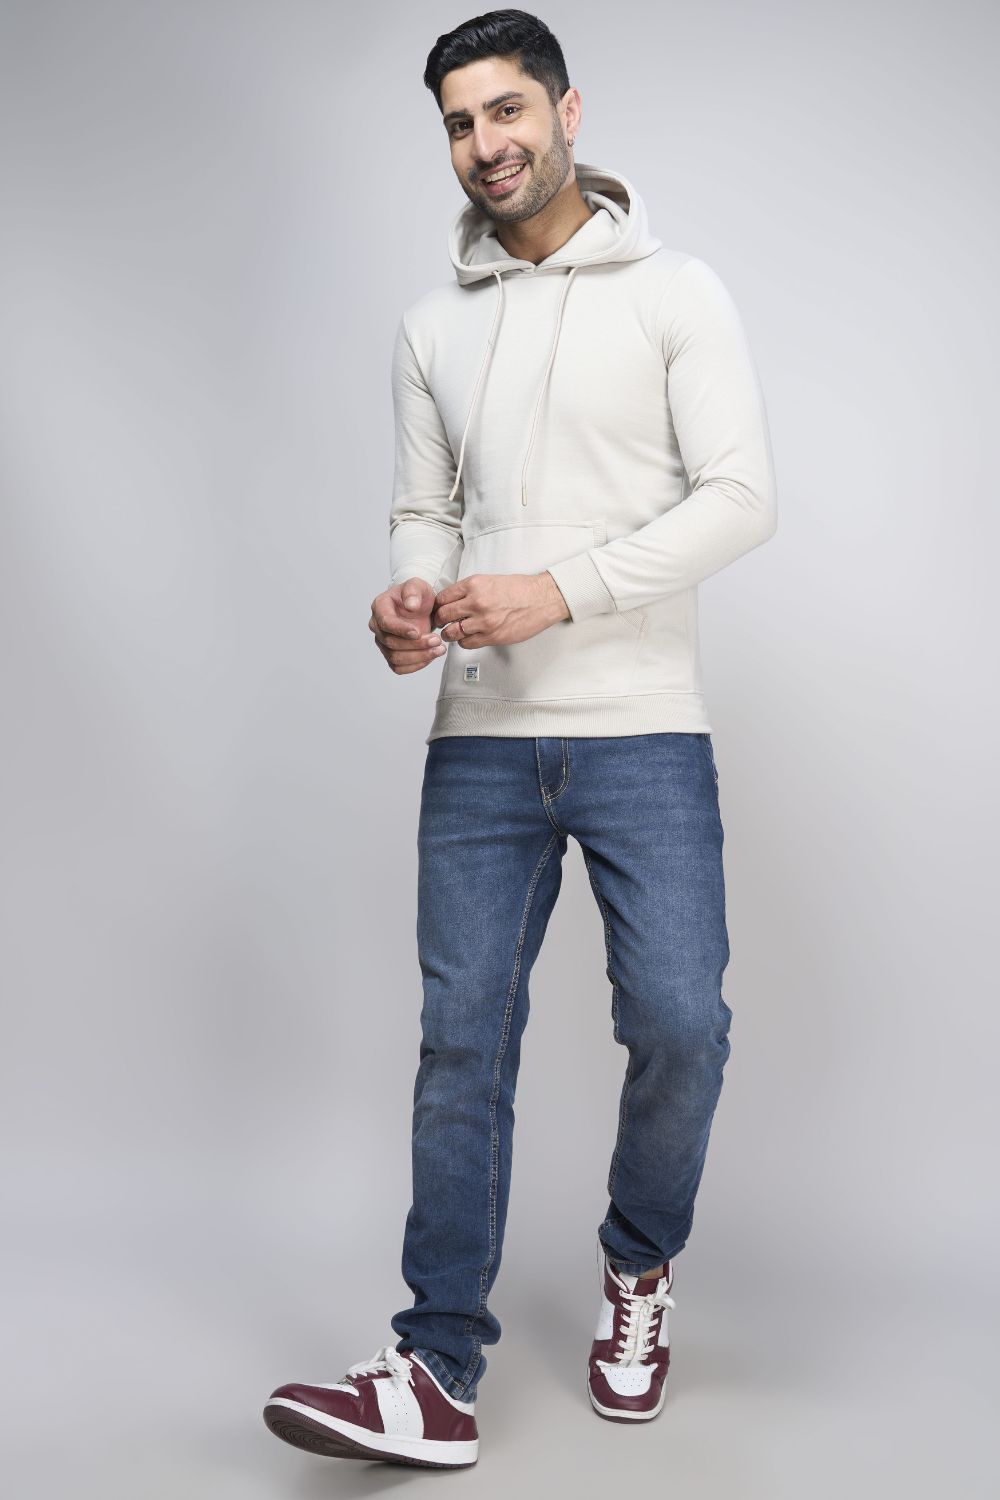 Silver Grey colored, hoodie for men with full sleeves and relaxed fit, full view.